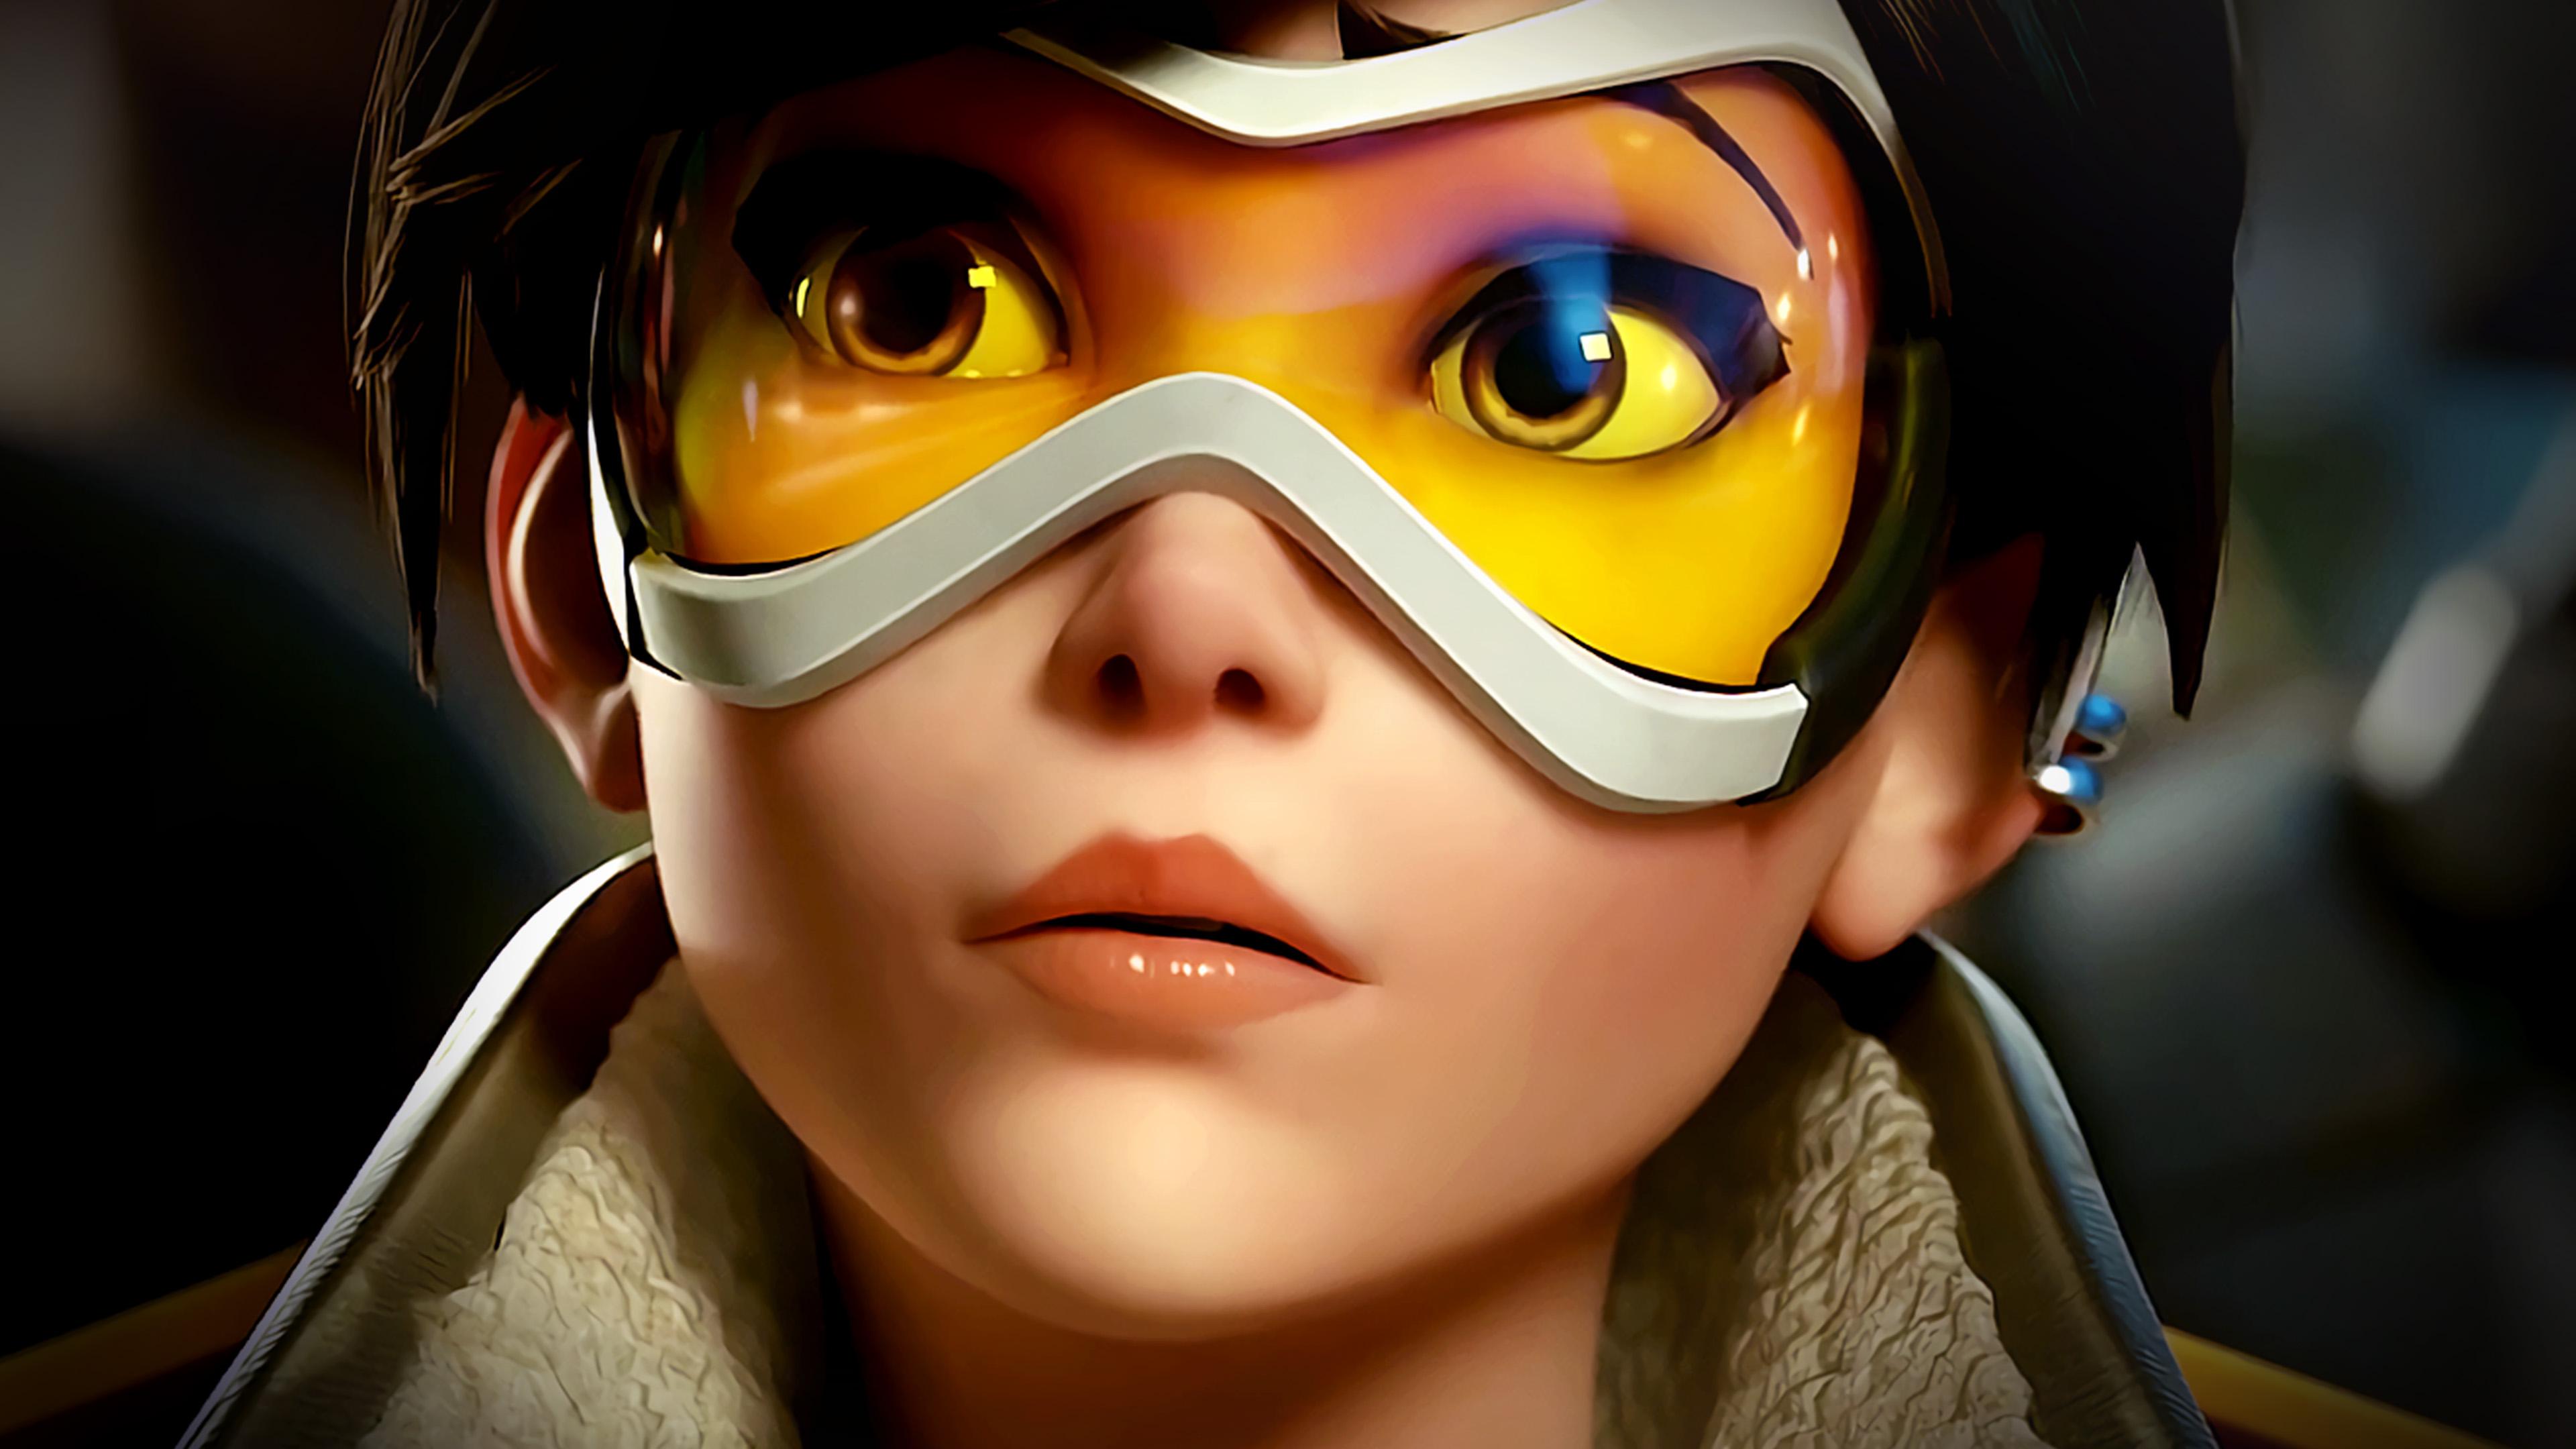 Tracer Overwatch HD Wallpaper, Download Tracer Overwatch HD…